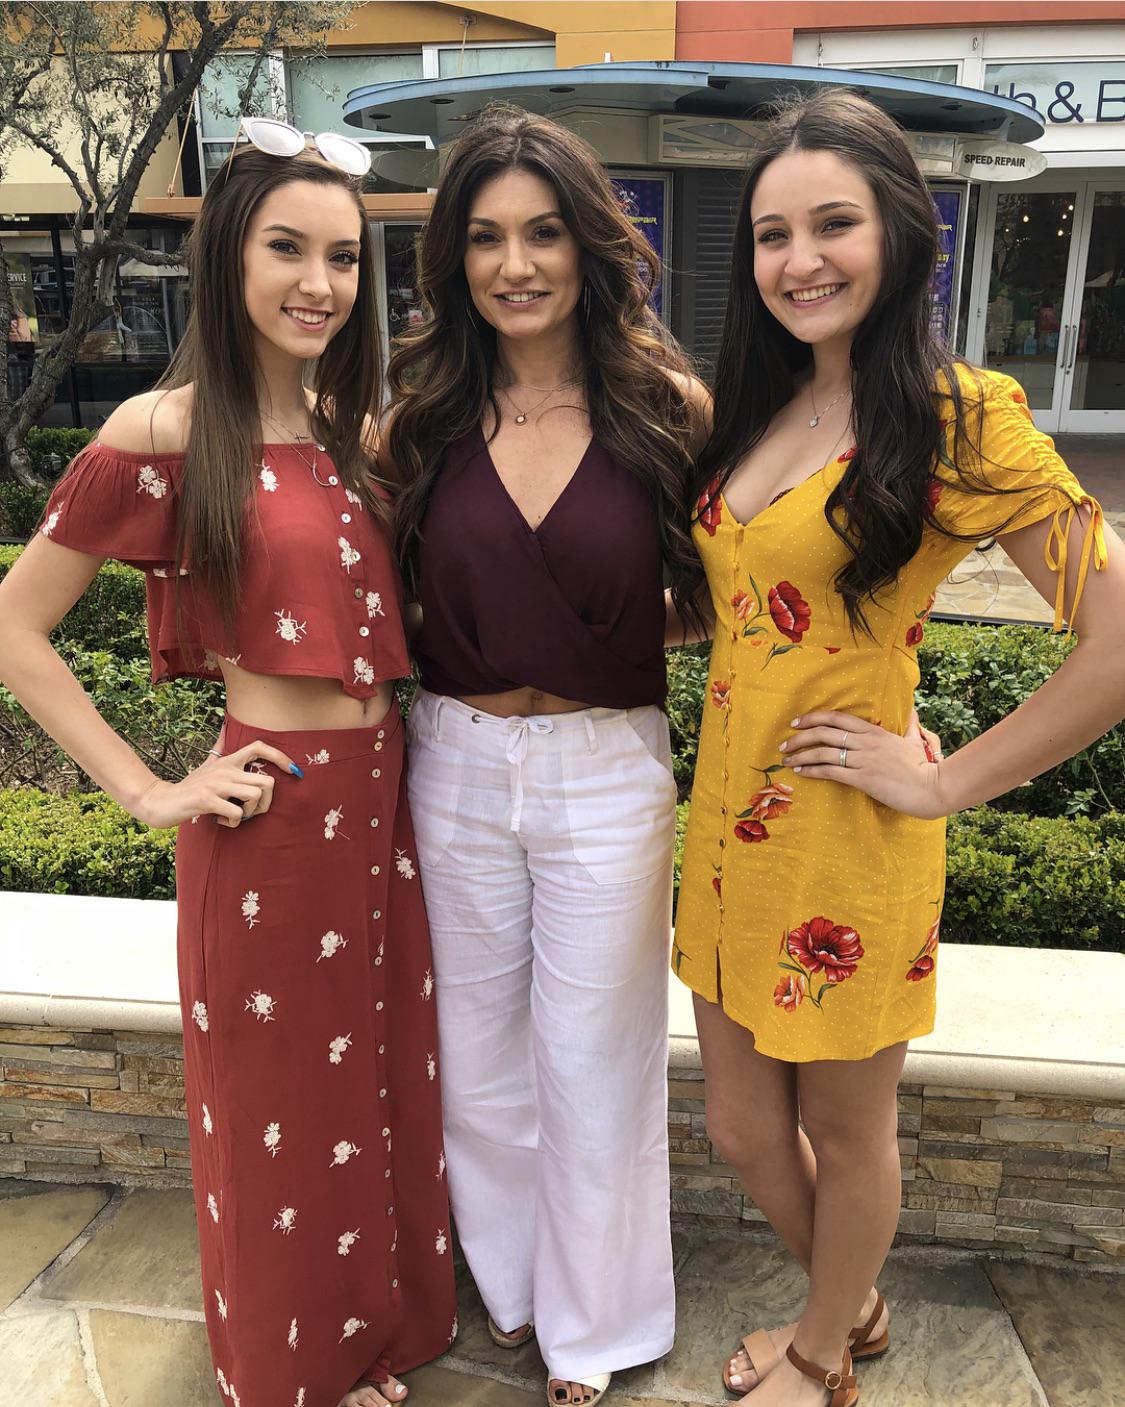 Mom or daughters